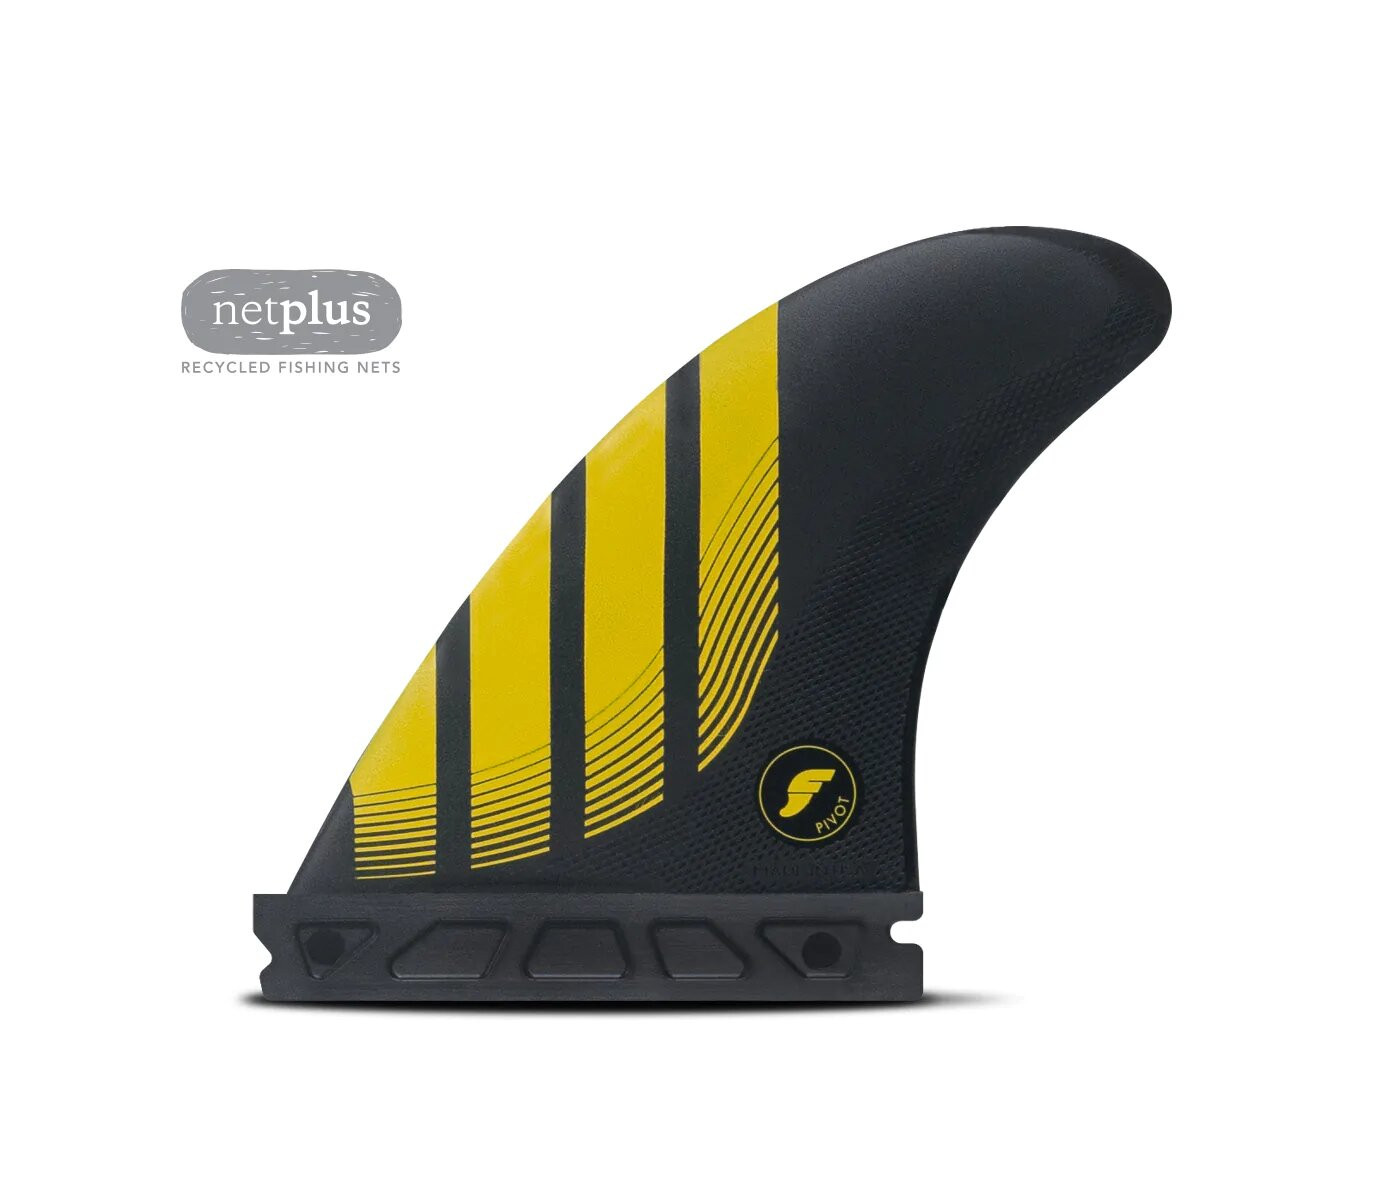 Dérives Thruster - P4 ALPHA series Carbon Yellow Thruster Set - taille S, FUTURES.